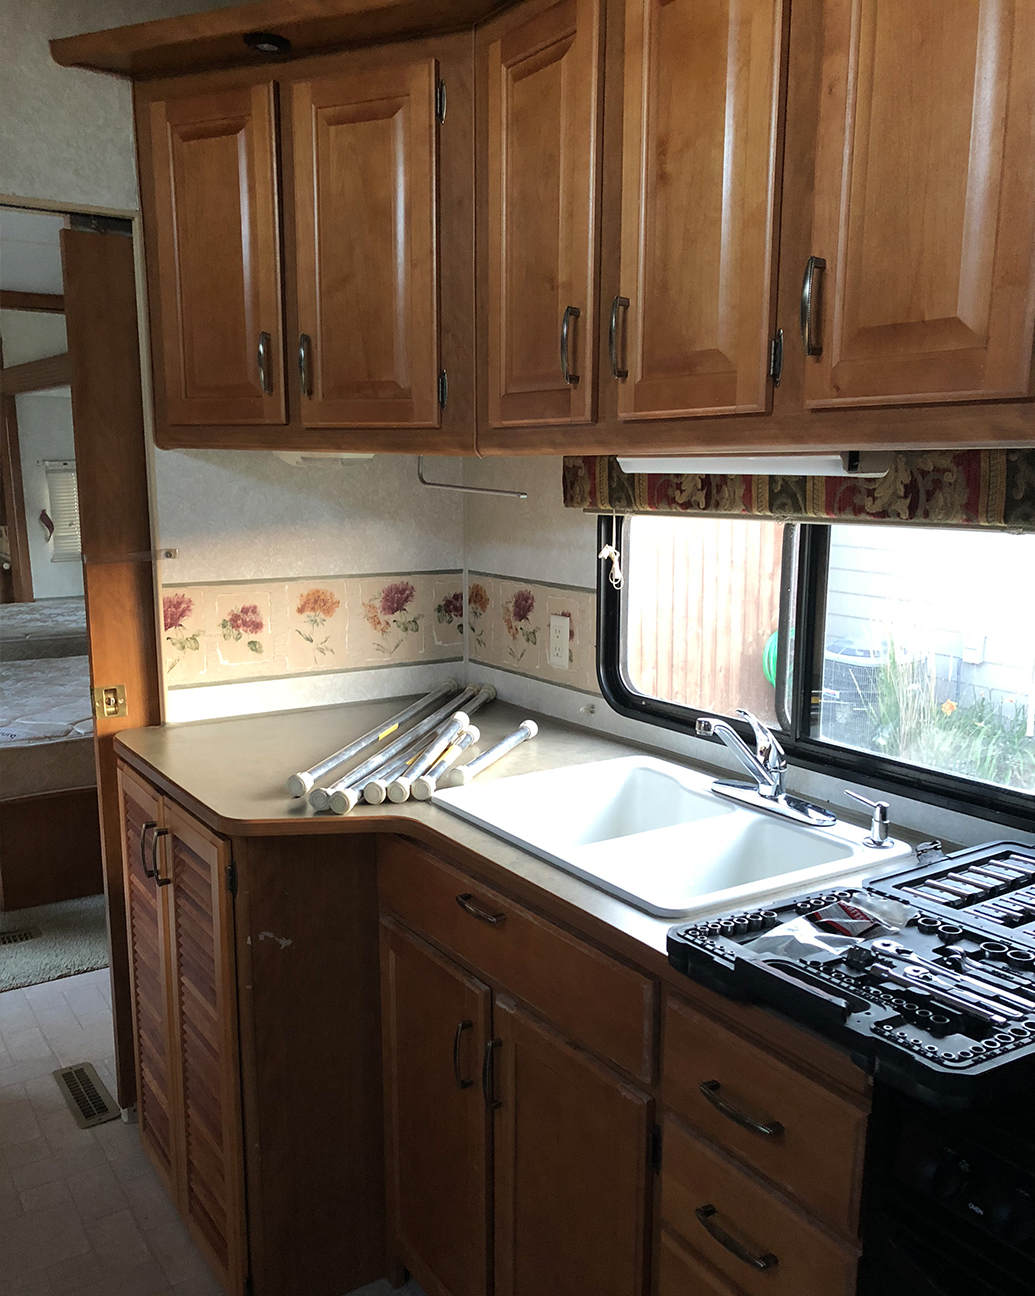 Outdated RV Kitchen before reno from from @fifthwheelfarmhouse